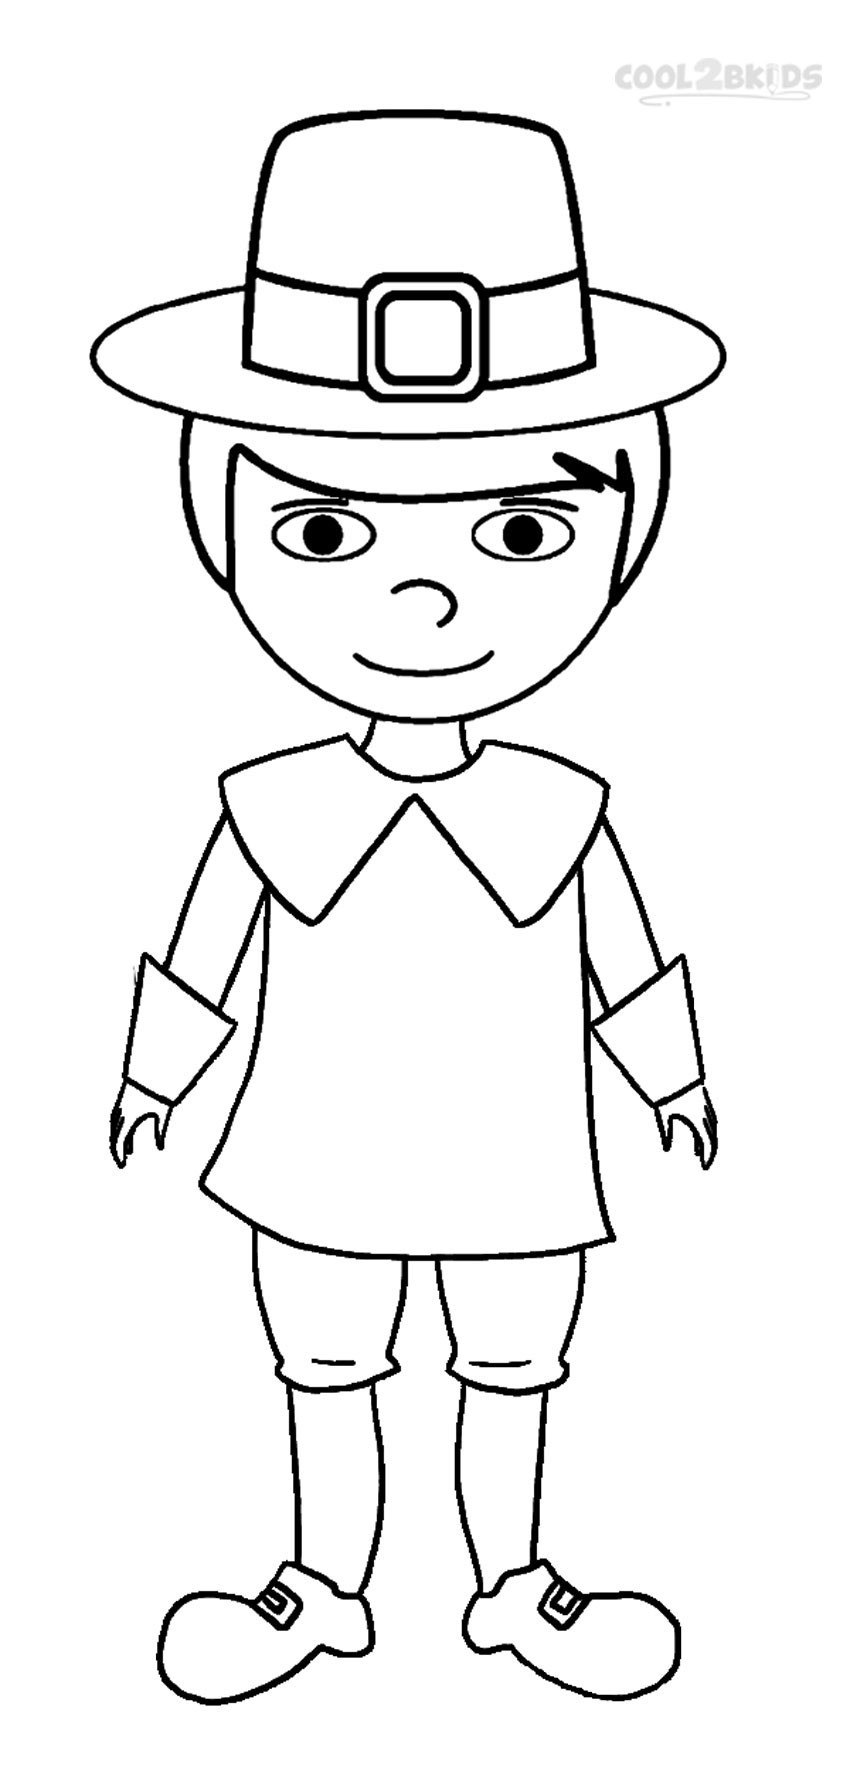 Boy Coloring Pages For Kids
 Printable Pilgrims Coloring Pages For Kids